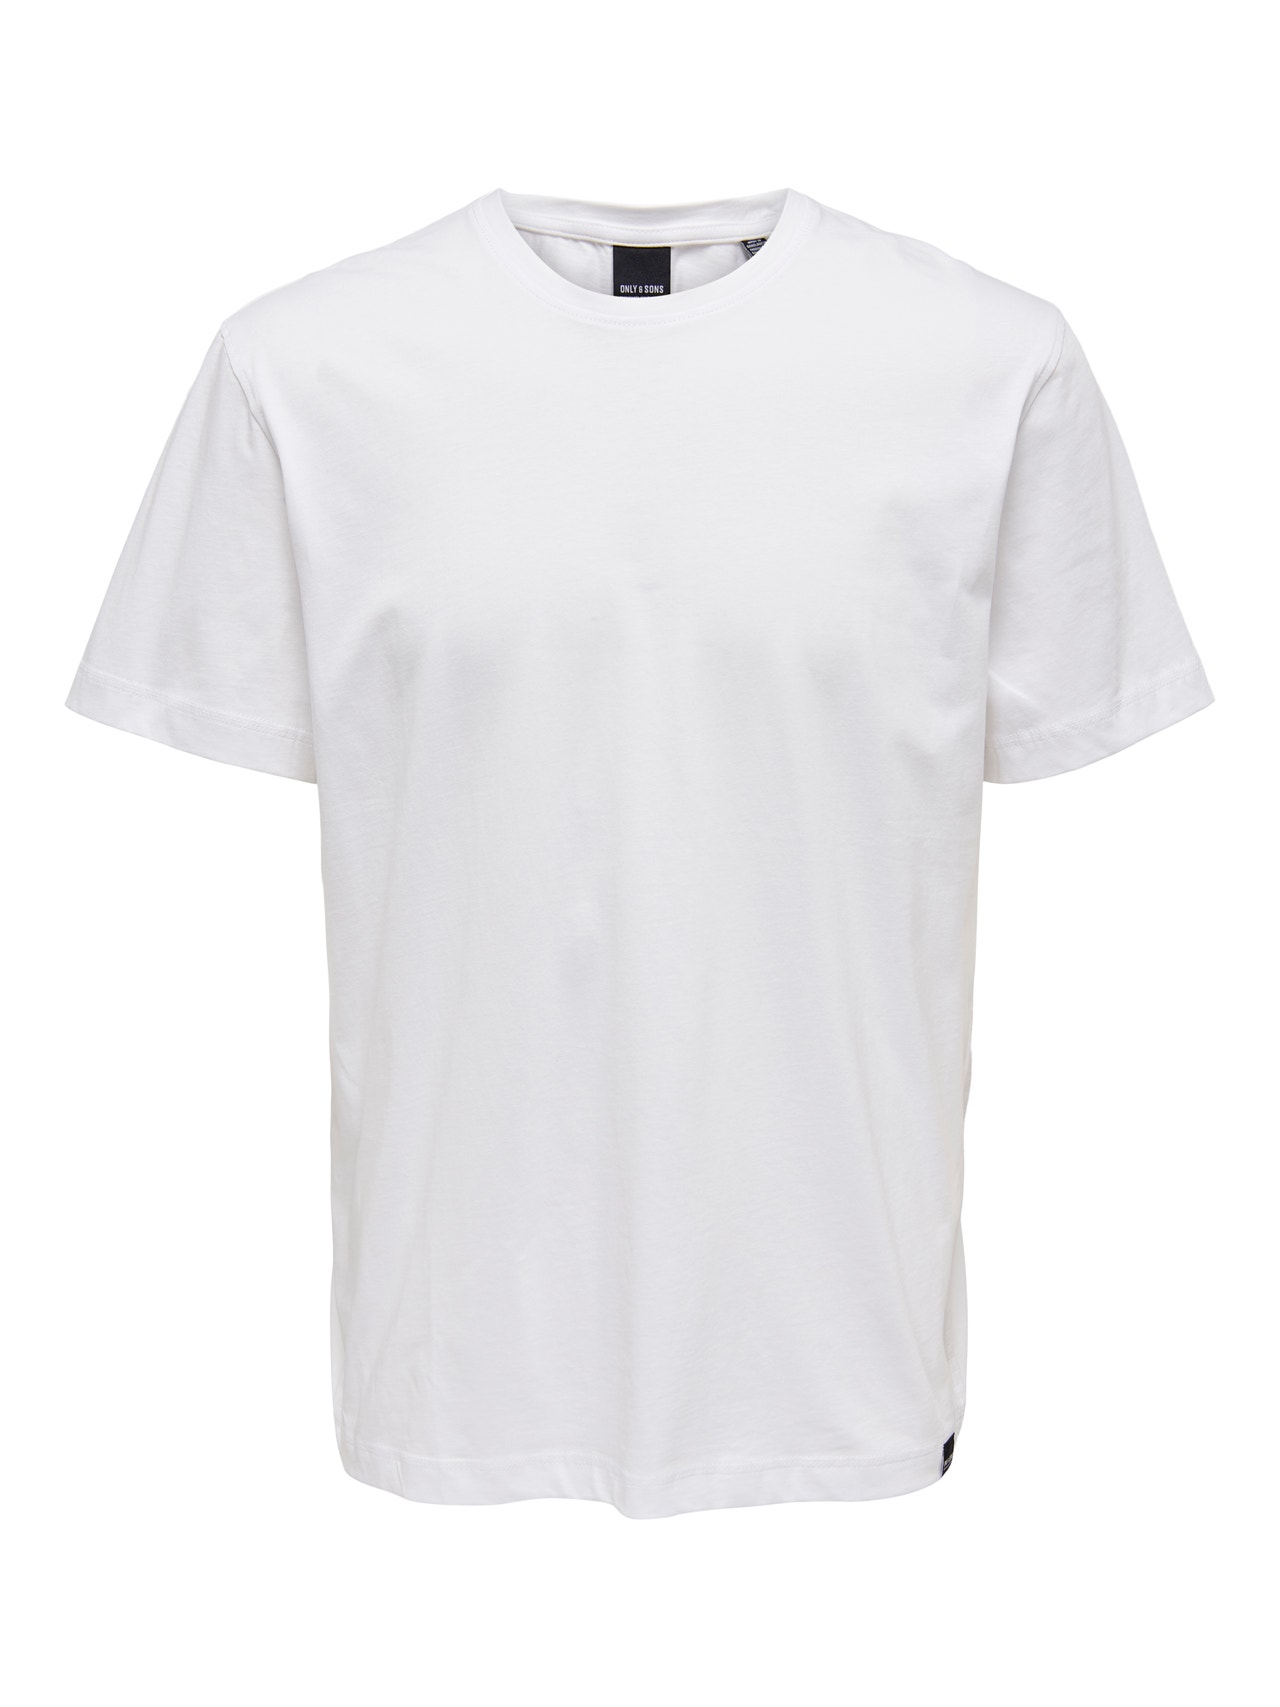 ONLY & SONS Regular Fit Round Neck T-Shirt -White - 22025208